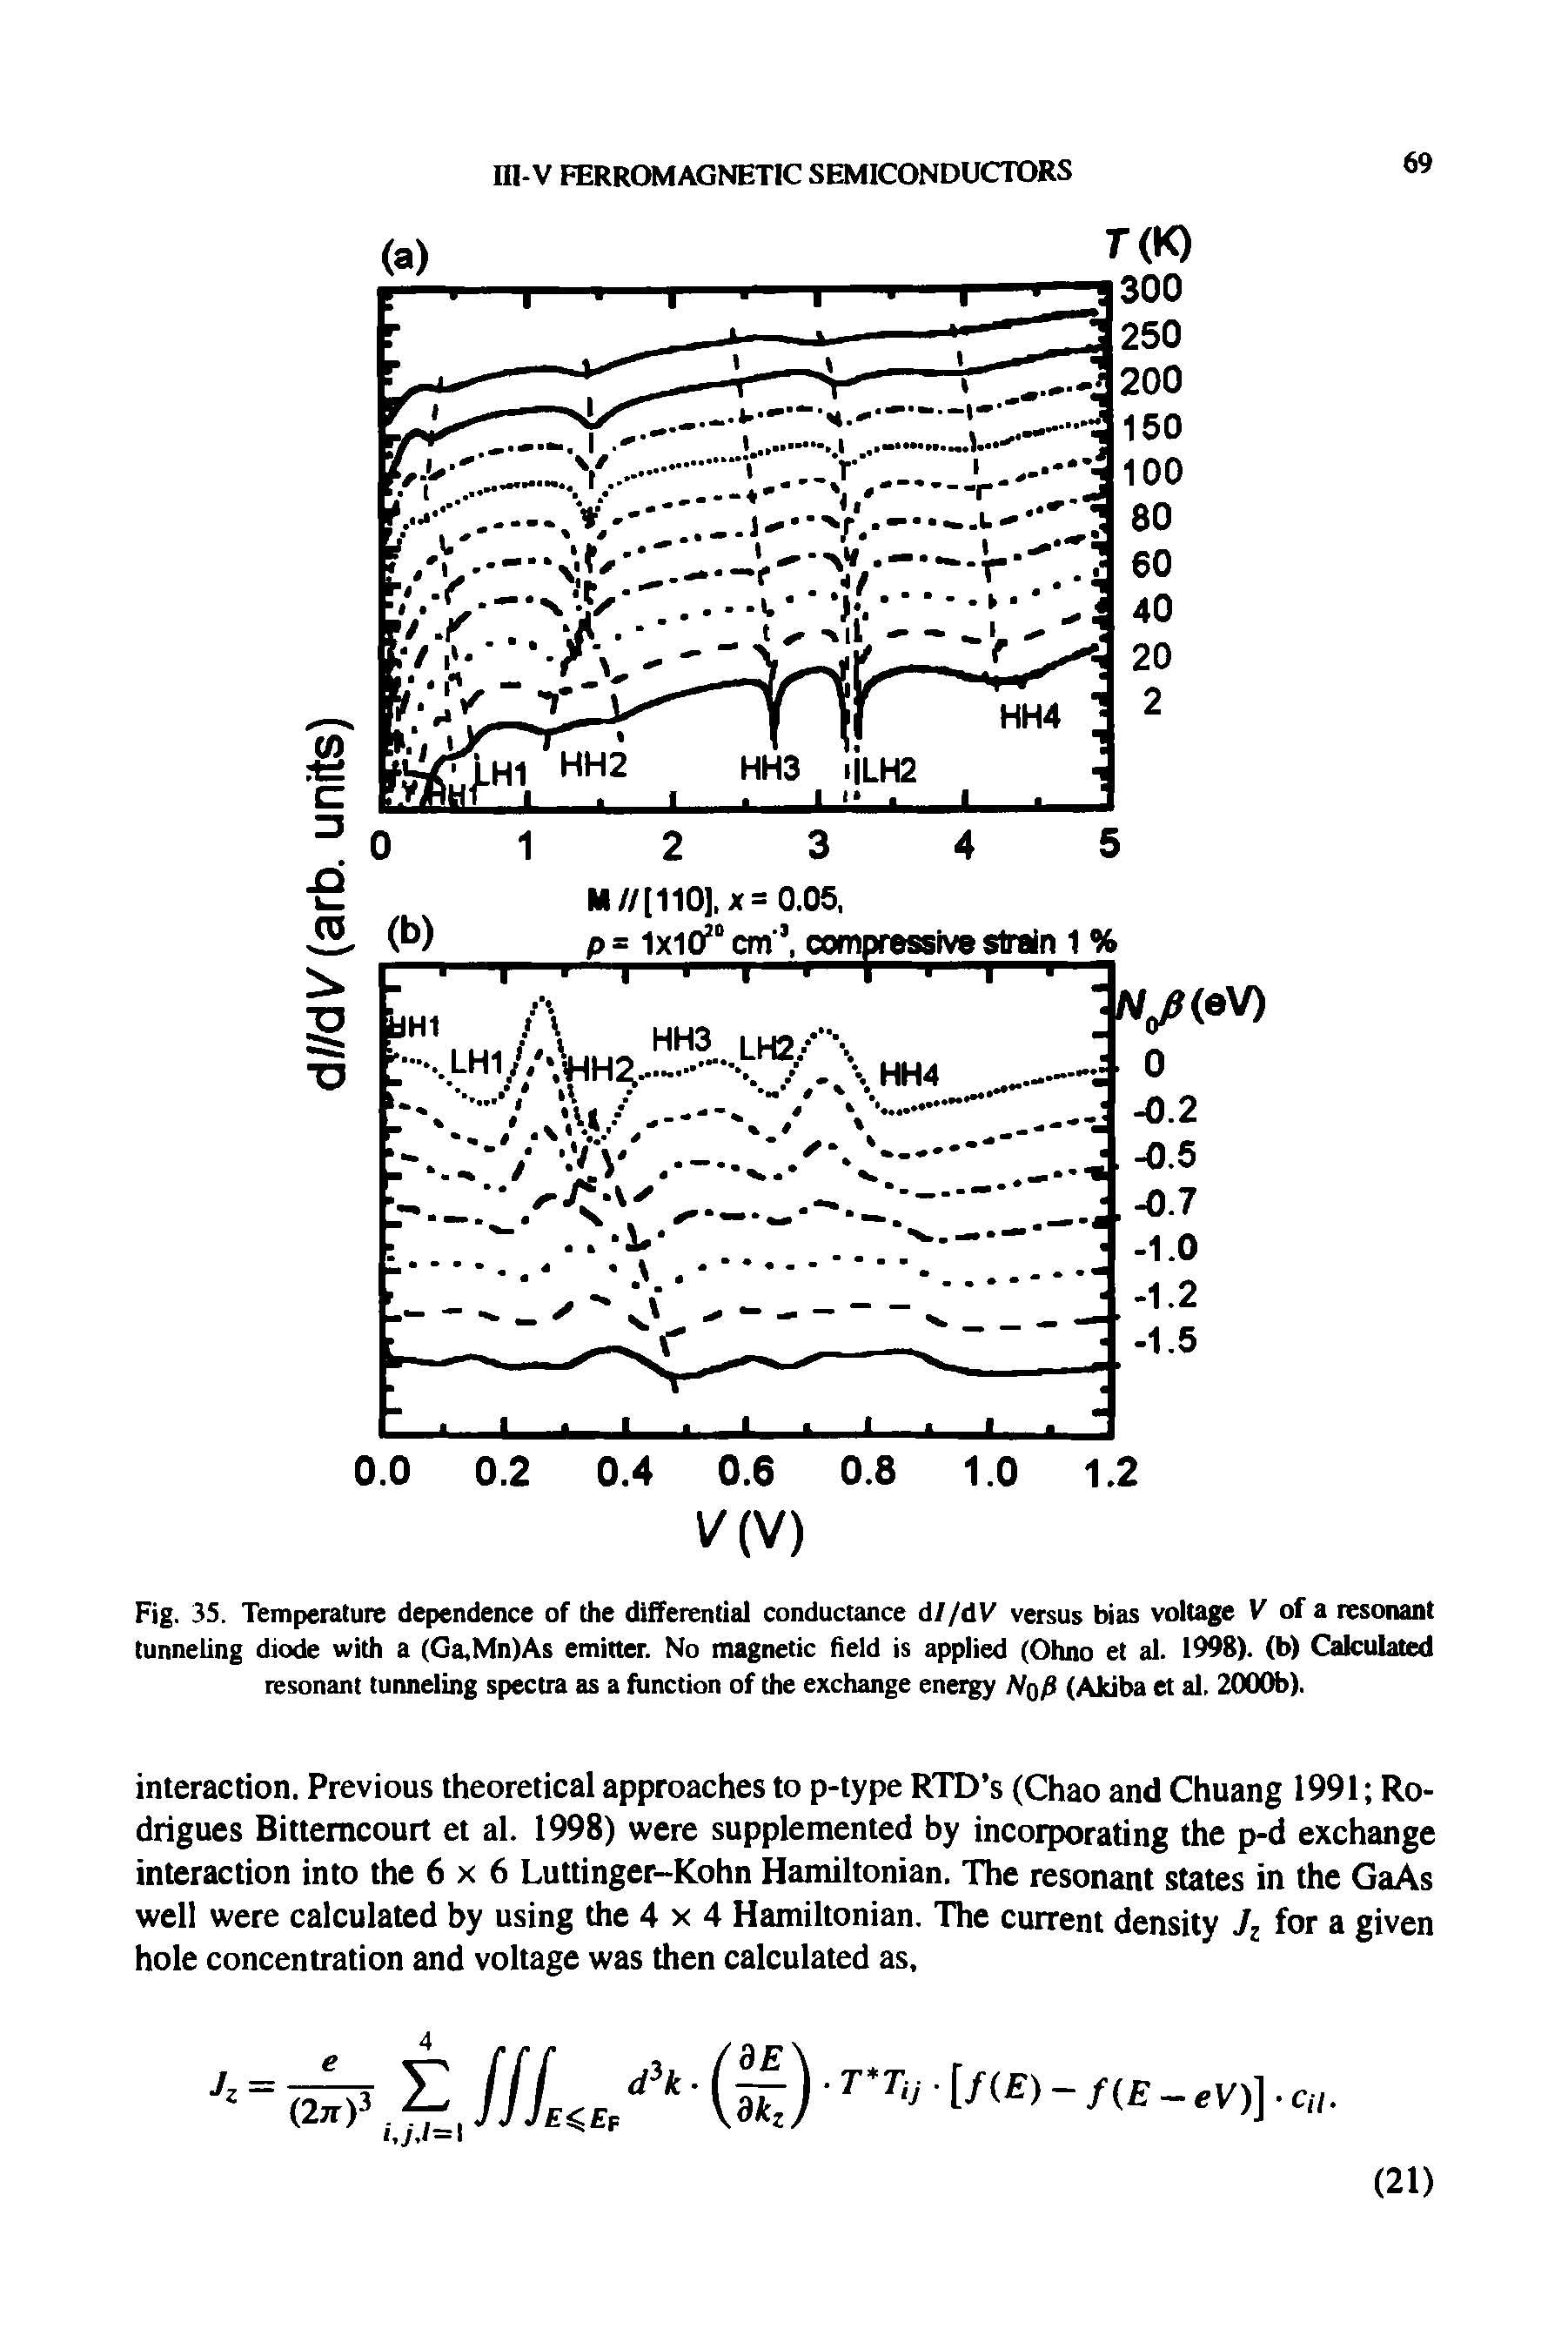 Fig. 35. Temperature dependence of the differential conductance d//dV versus bias voltage V of a resonant tunneling diode with a (Ga,Mn)As emitter. No magnetic held is applied (Ohno et al. 1998). (b) Calculated resonant tunneling spectra as a function of the exchange energy NqP (Akiba et al. 2000b).